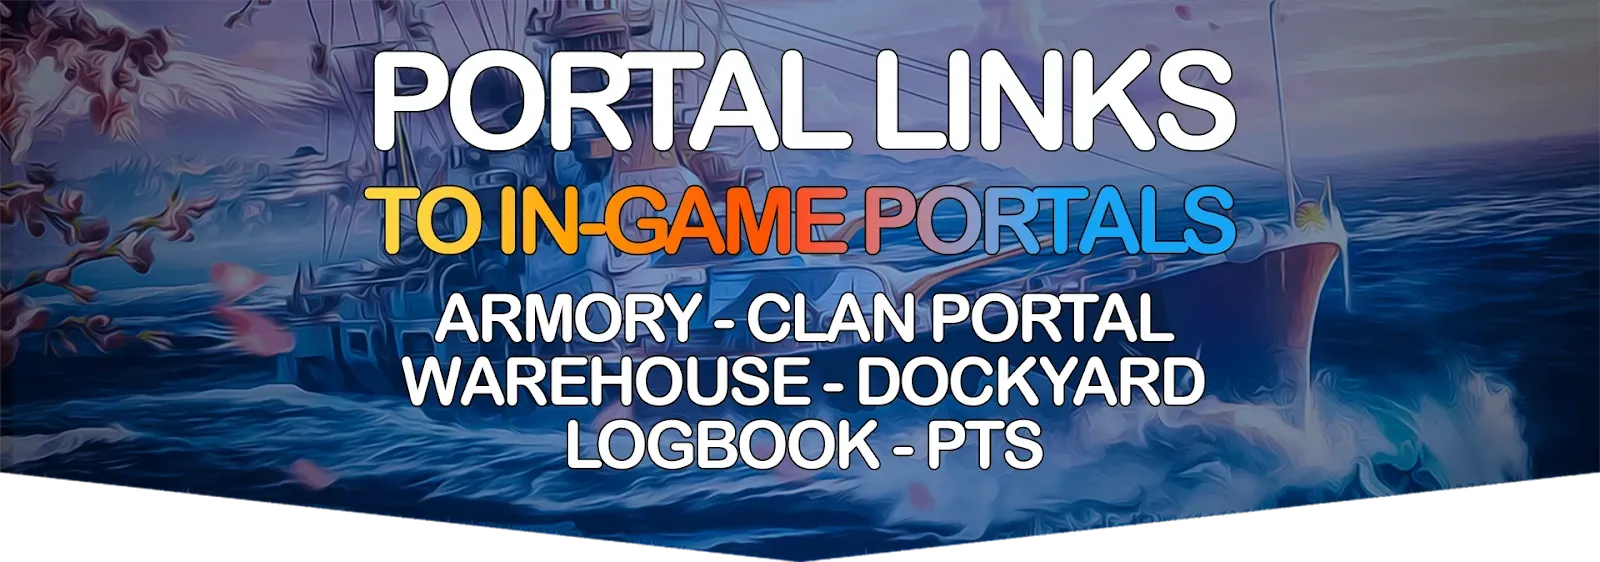 Links to in-game Portals